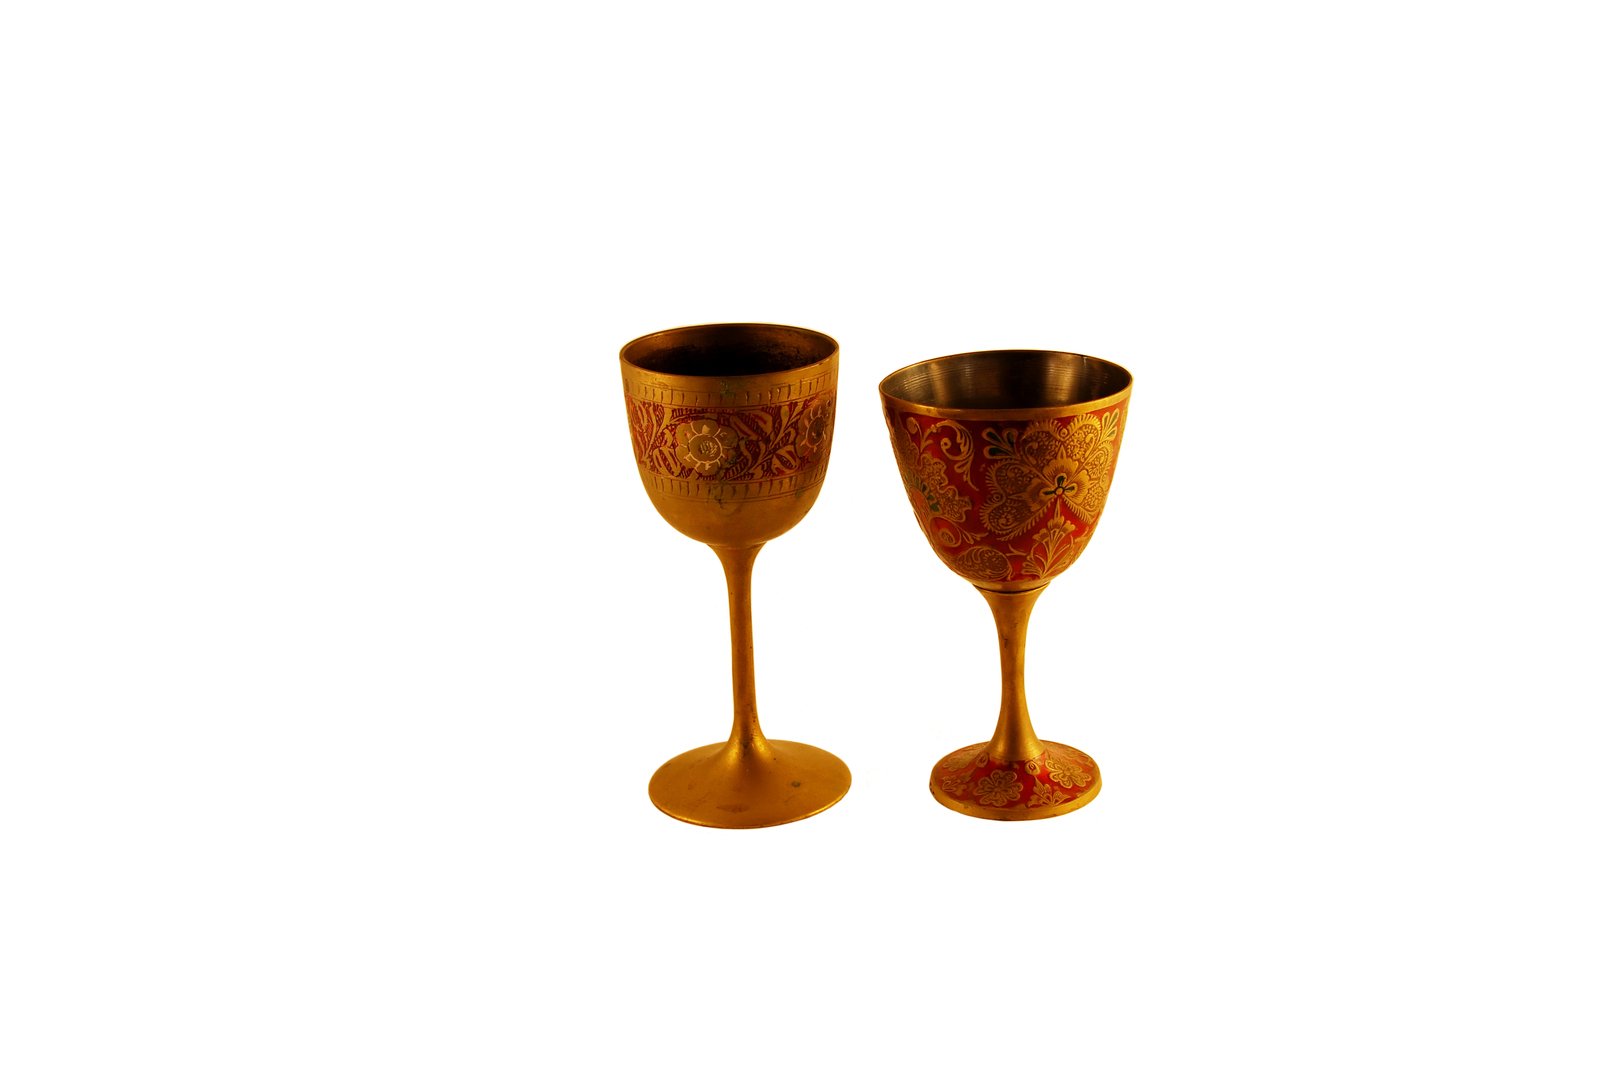 a gold goblet sitting next to a tall gold goblet with a golden design on the outside